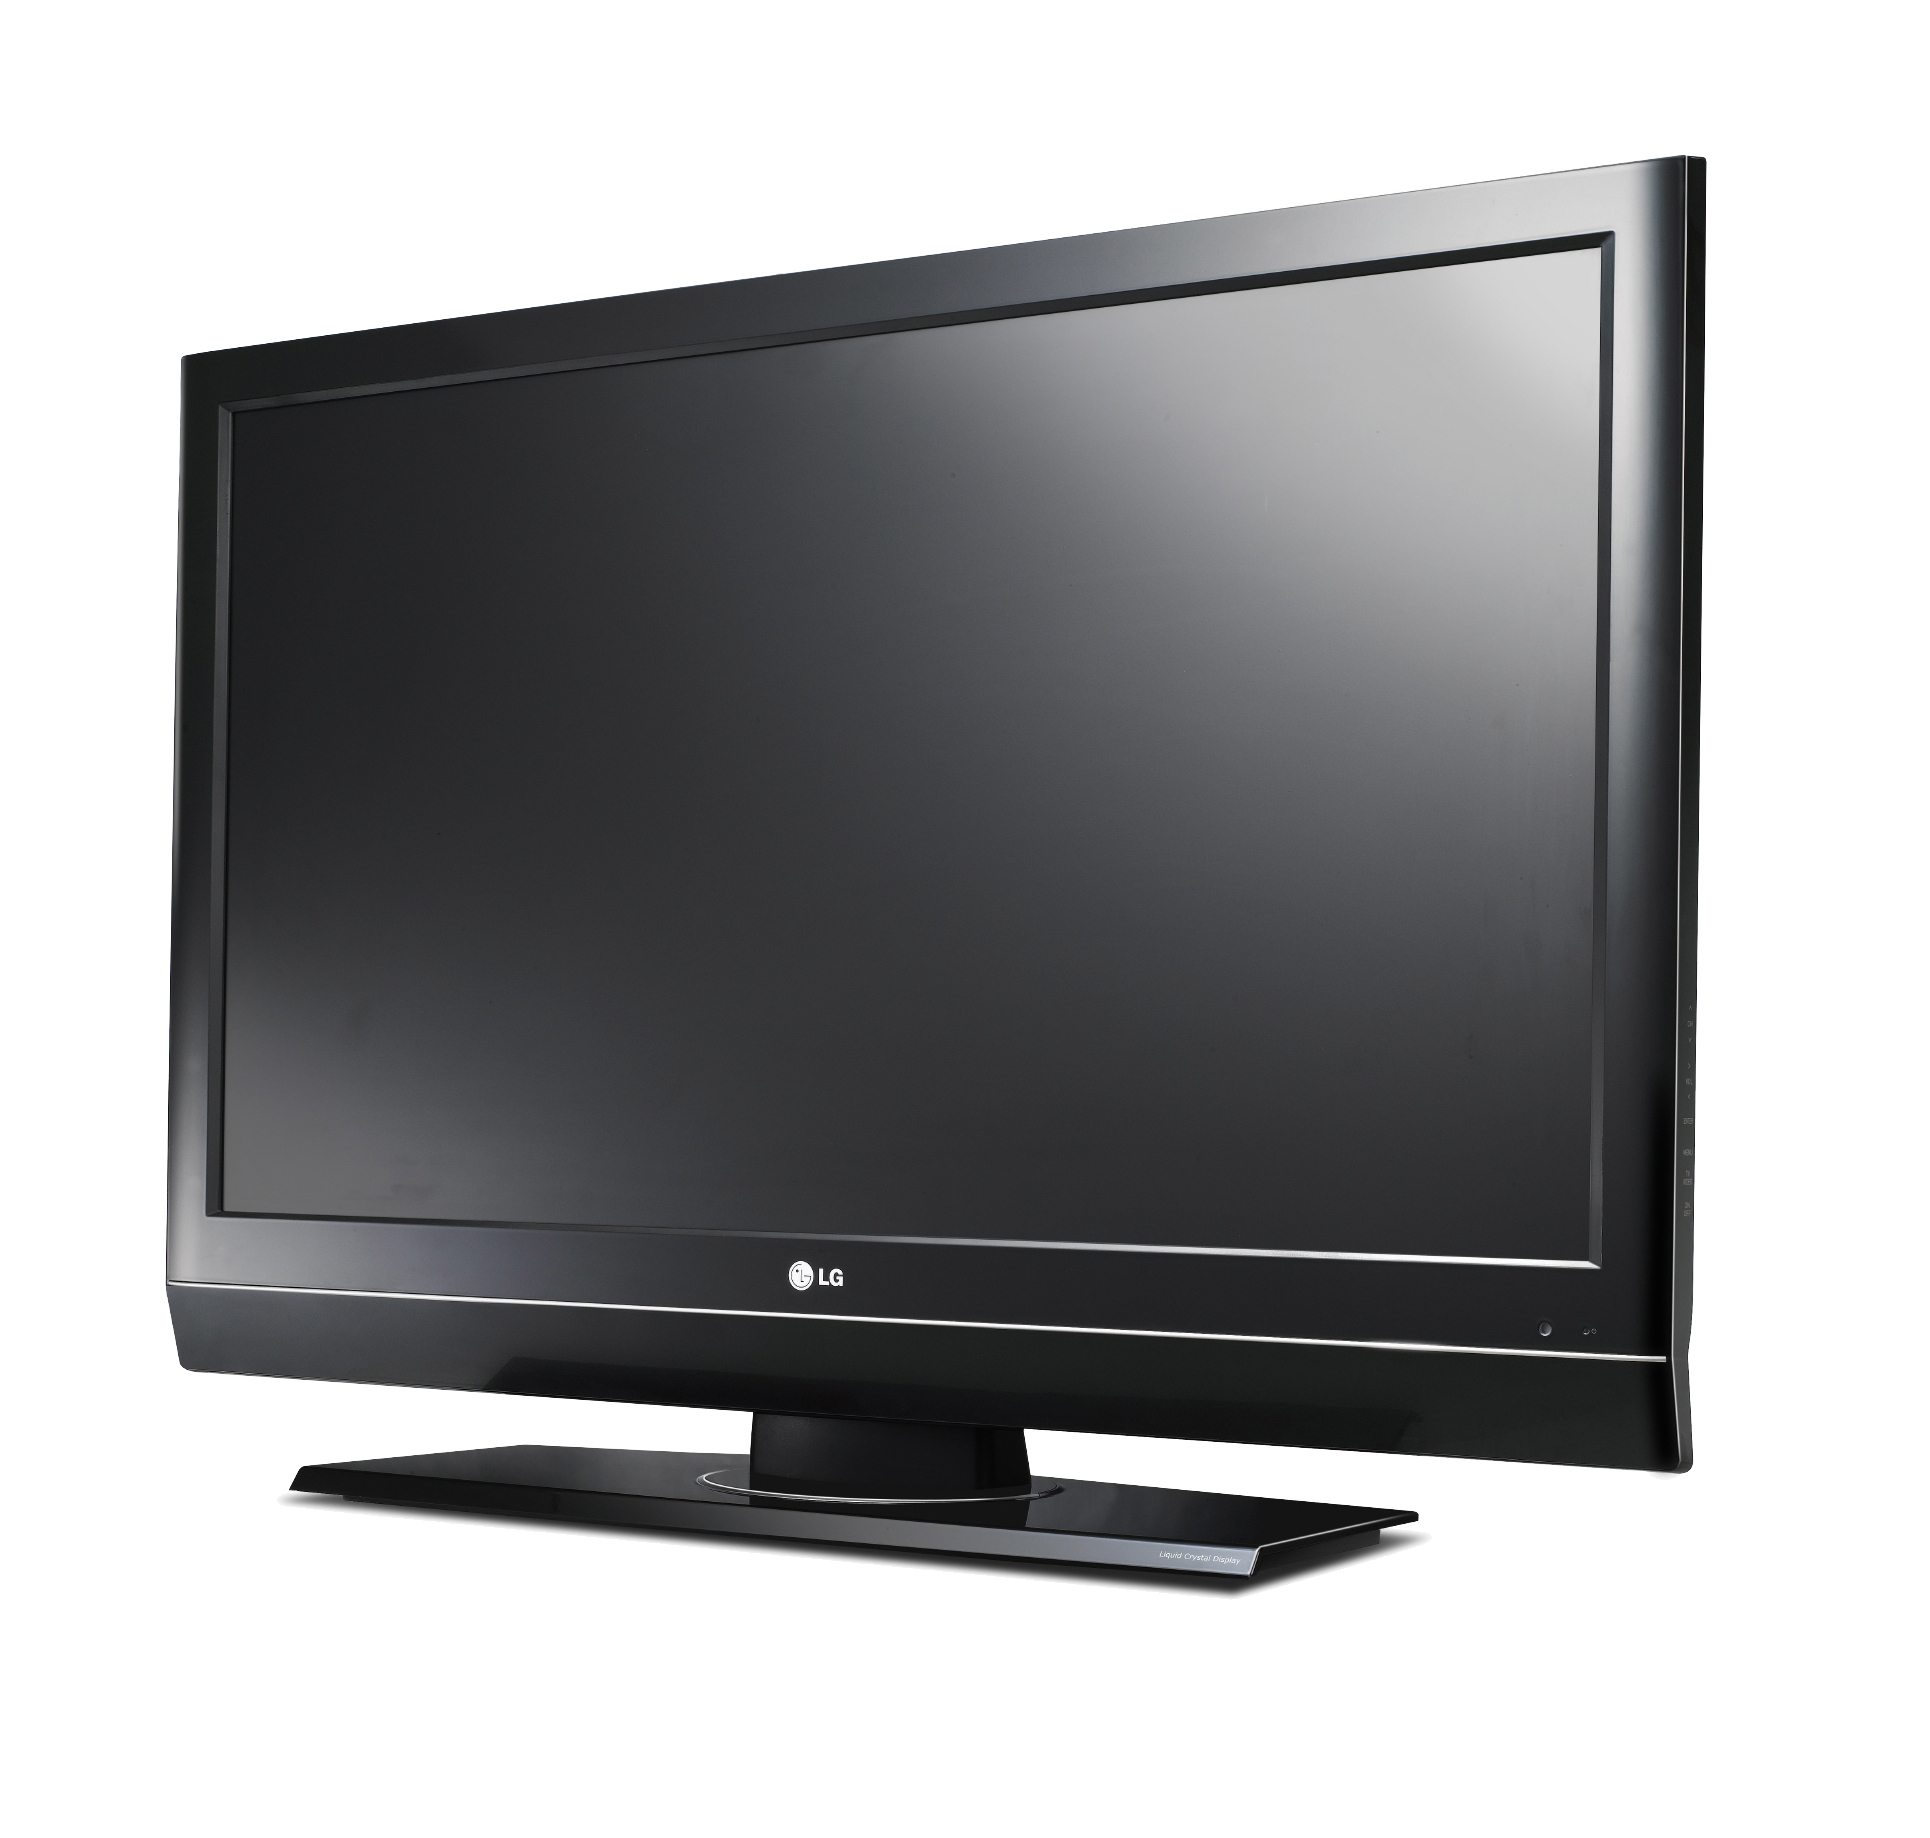 An LG energy-efficient television.